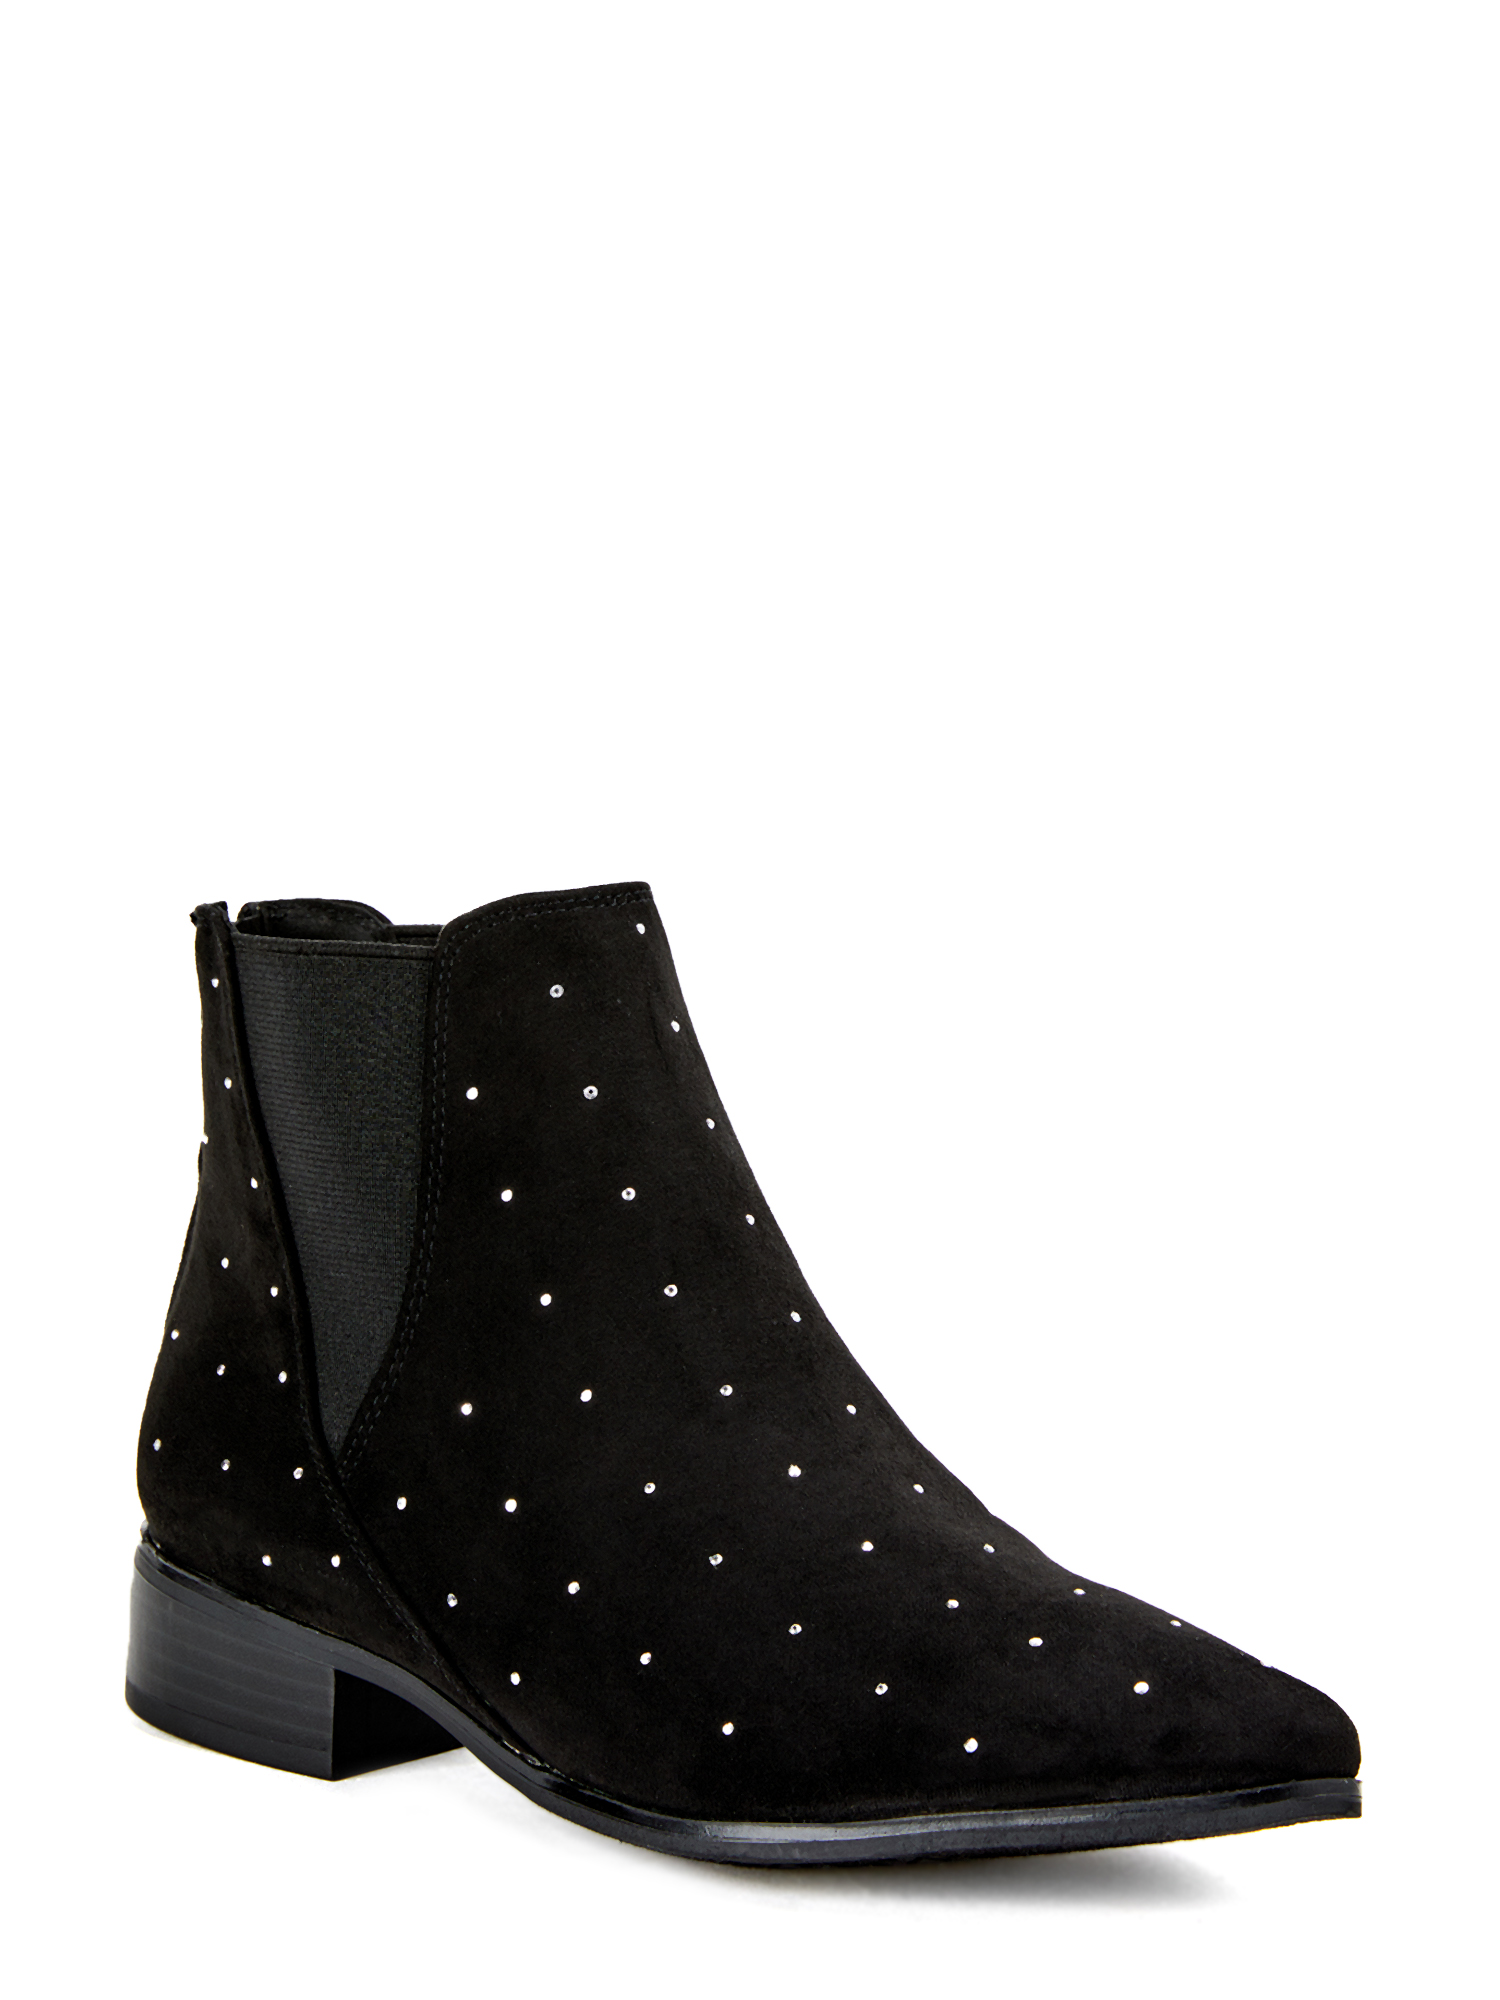 Portland Boot Company Women?s Canny Studded Booties - image 1 of 6